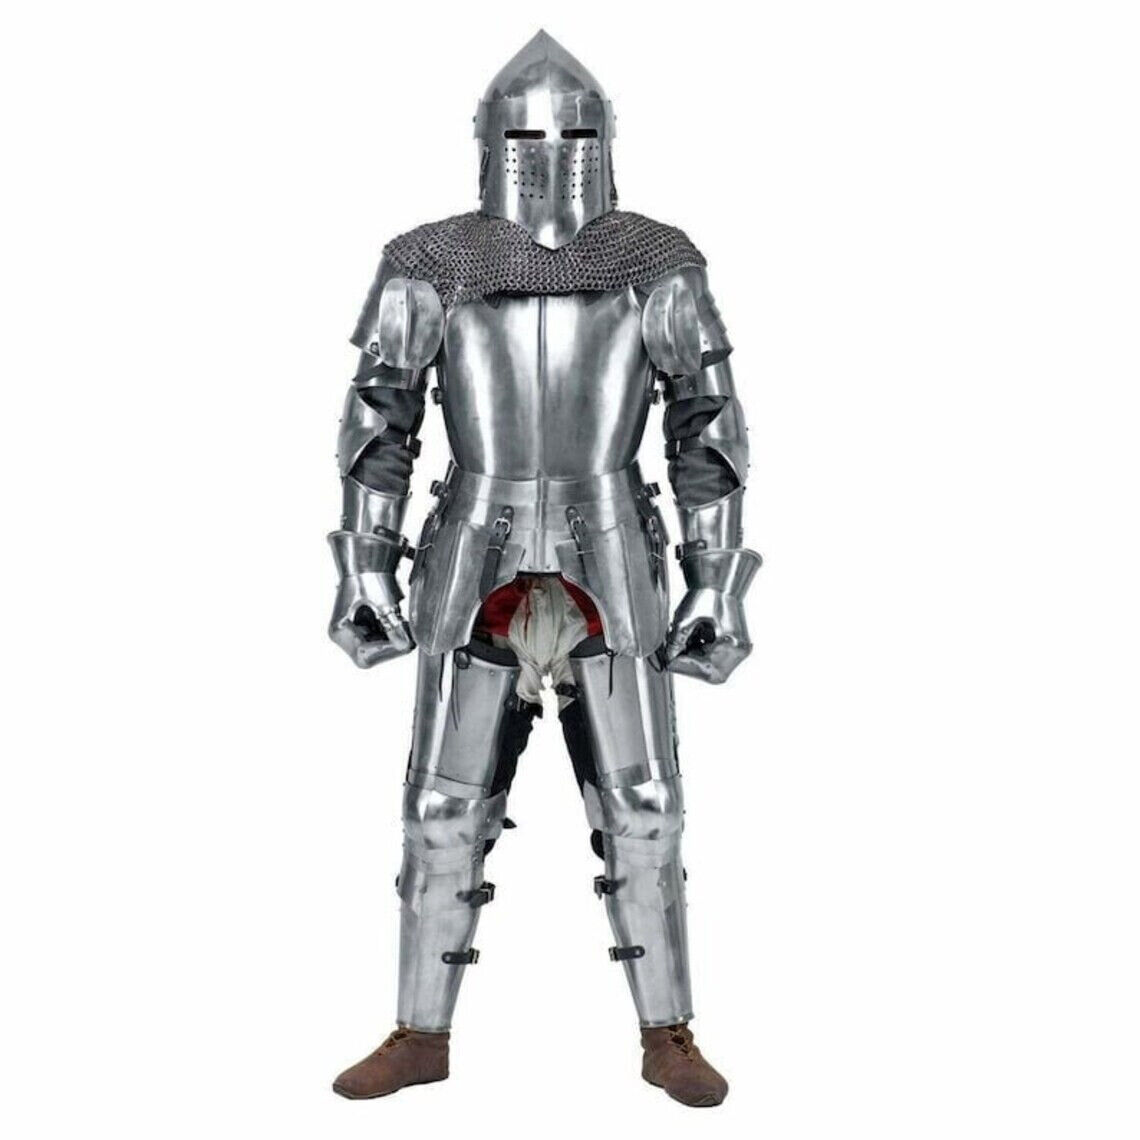 Antique 16th Century Medieval Wearable Full Suit Of Armor For Battle Steel Prot